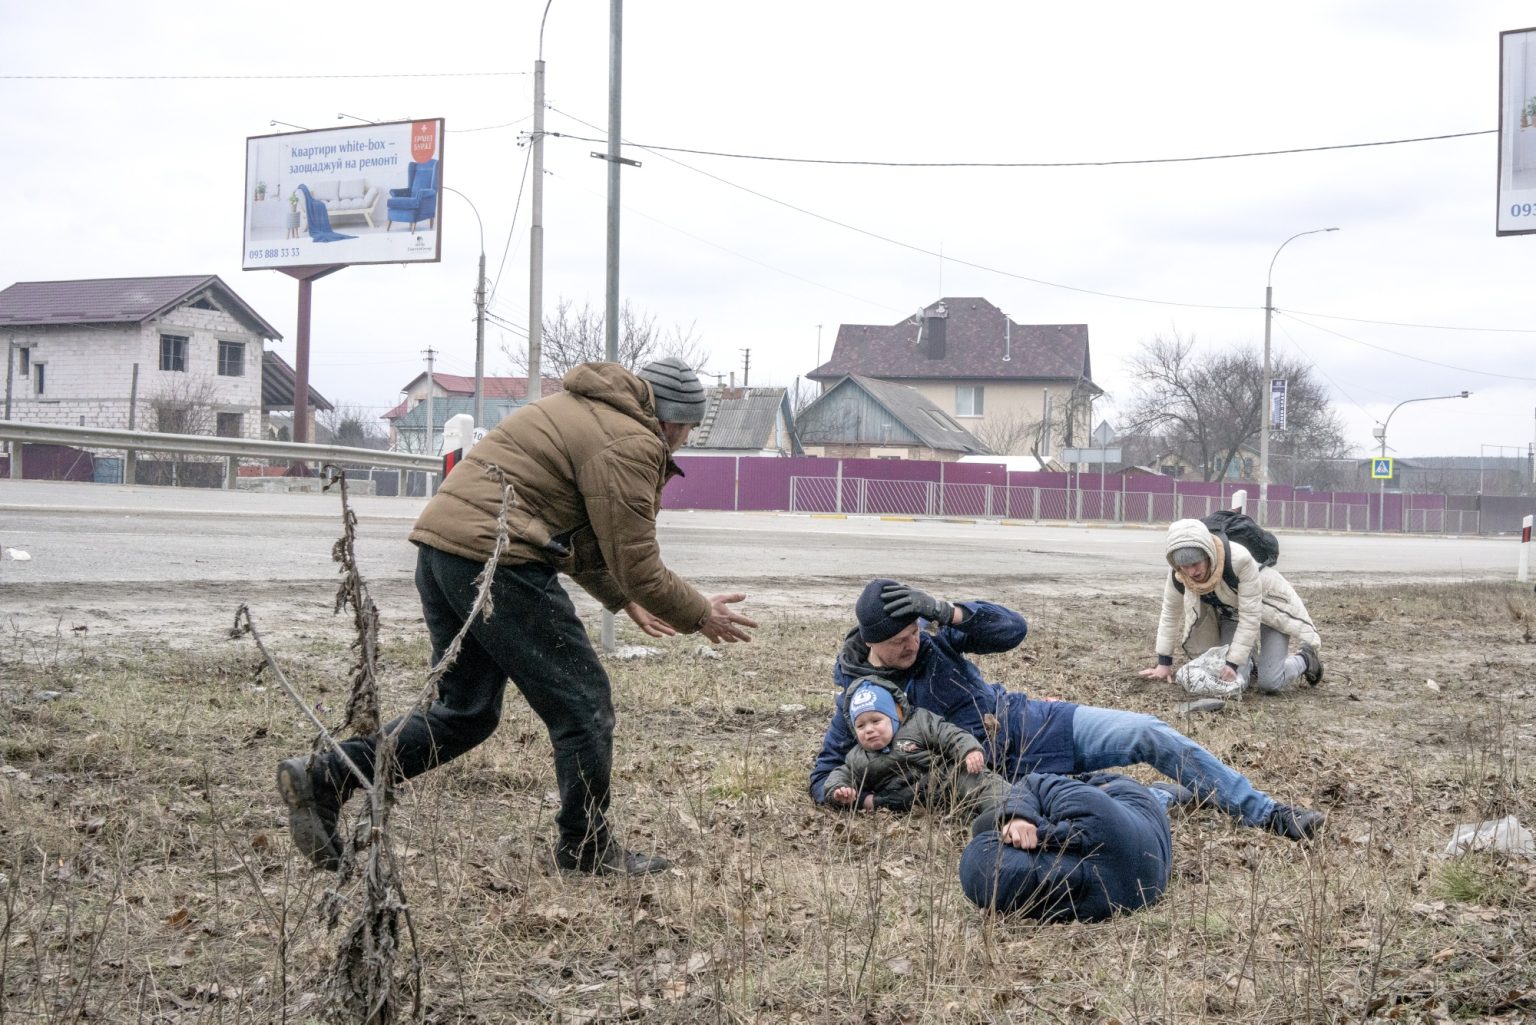 UKRAINE, Kyiv. March 06, 2022 - Civilians sprawled on the ground in search of shelter during a bombing raid after crossing a destroyed bridge as they tries to leave the city of Irpin, in the Kyiv region.